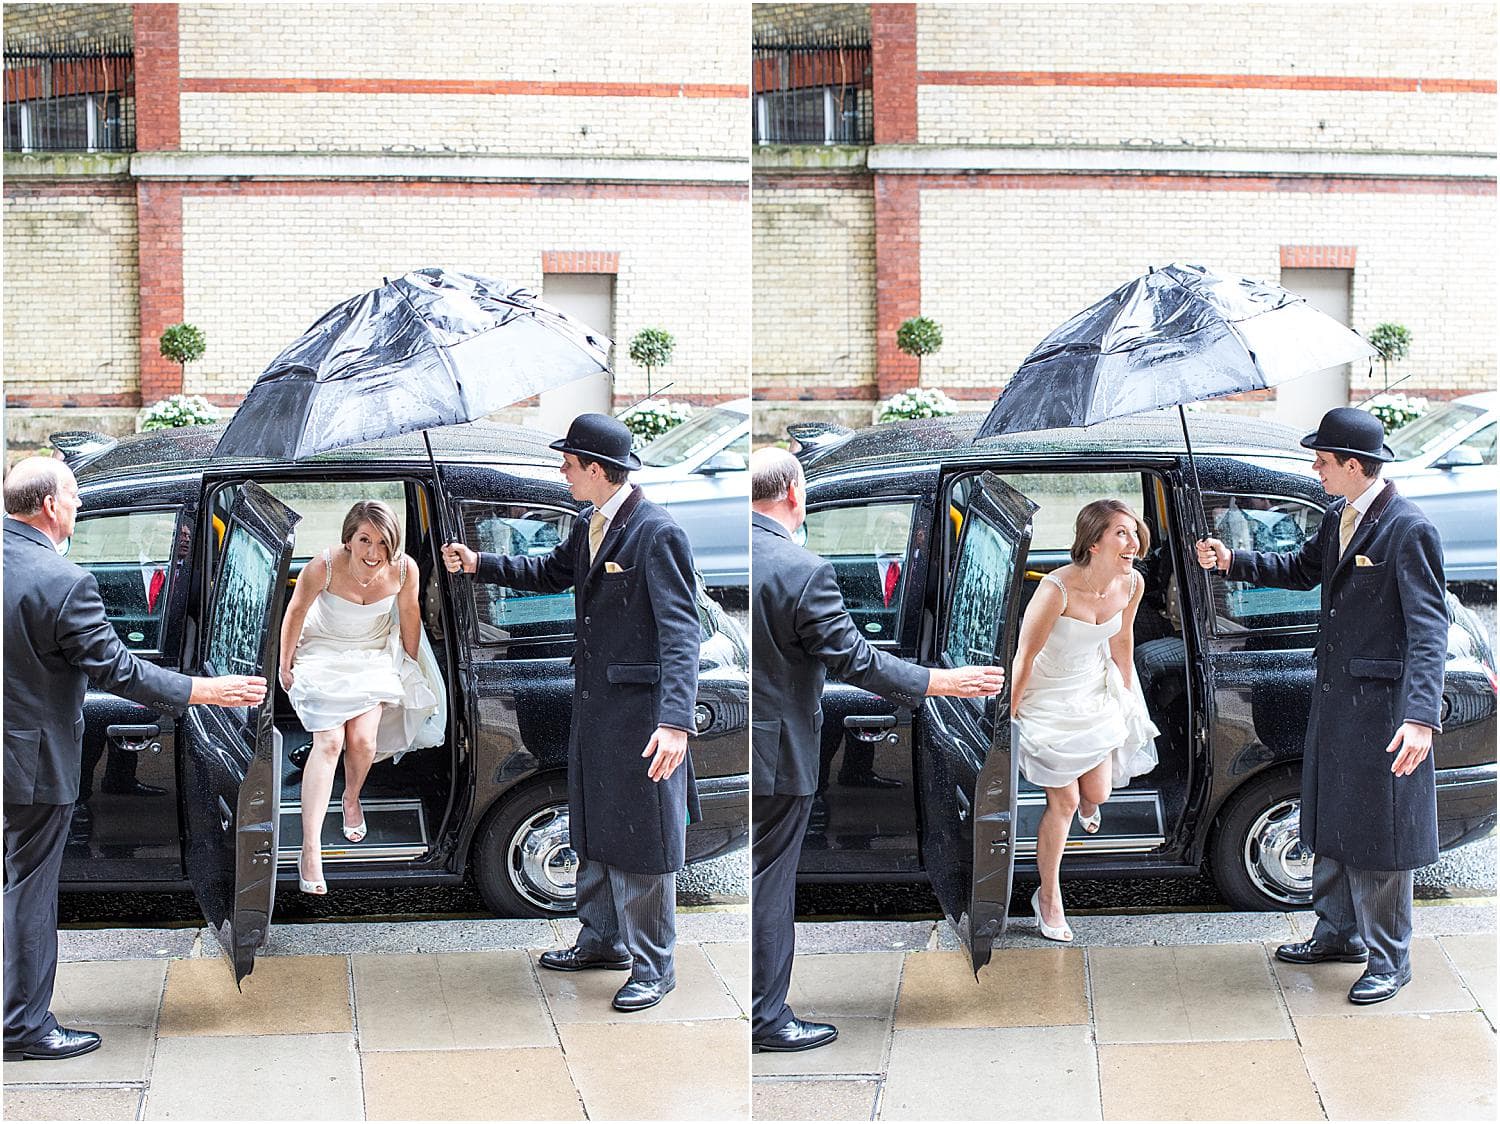 Weddings at The Goring Hotel in London Victoria